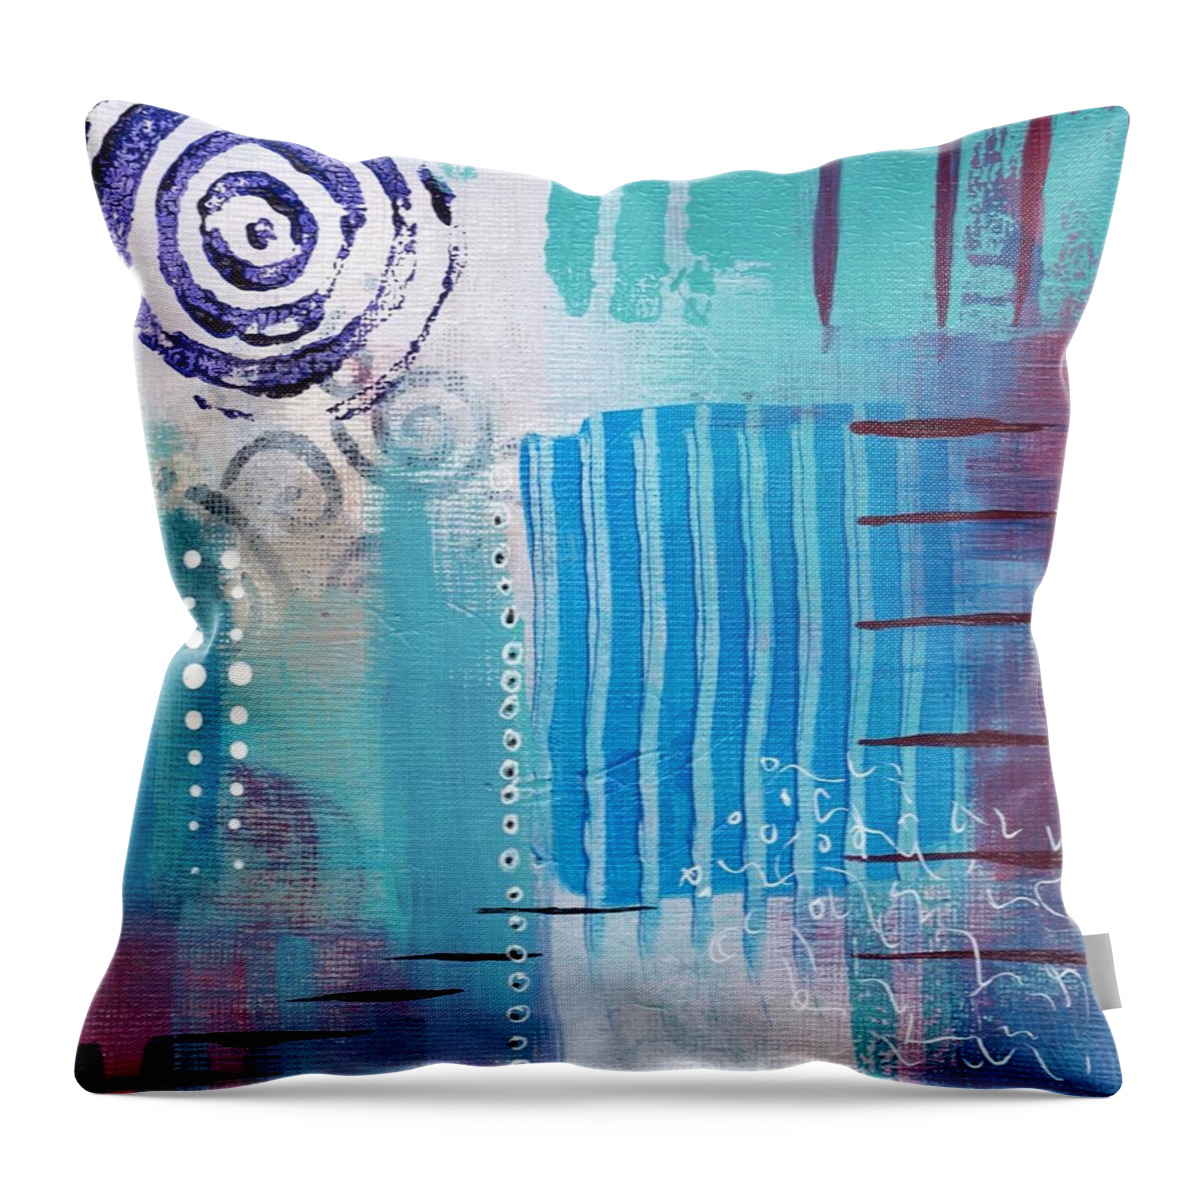 Abstractart Throw Pillow featuring the painting Daily Abstract Four by Suzzanna Frank